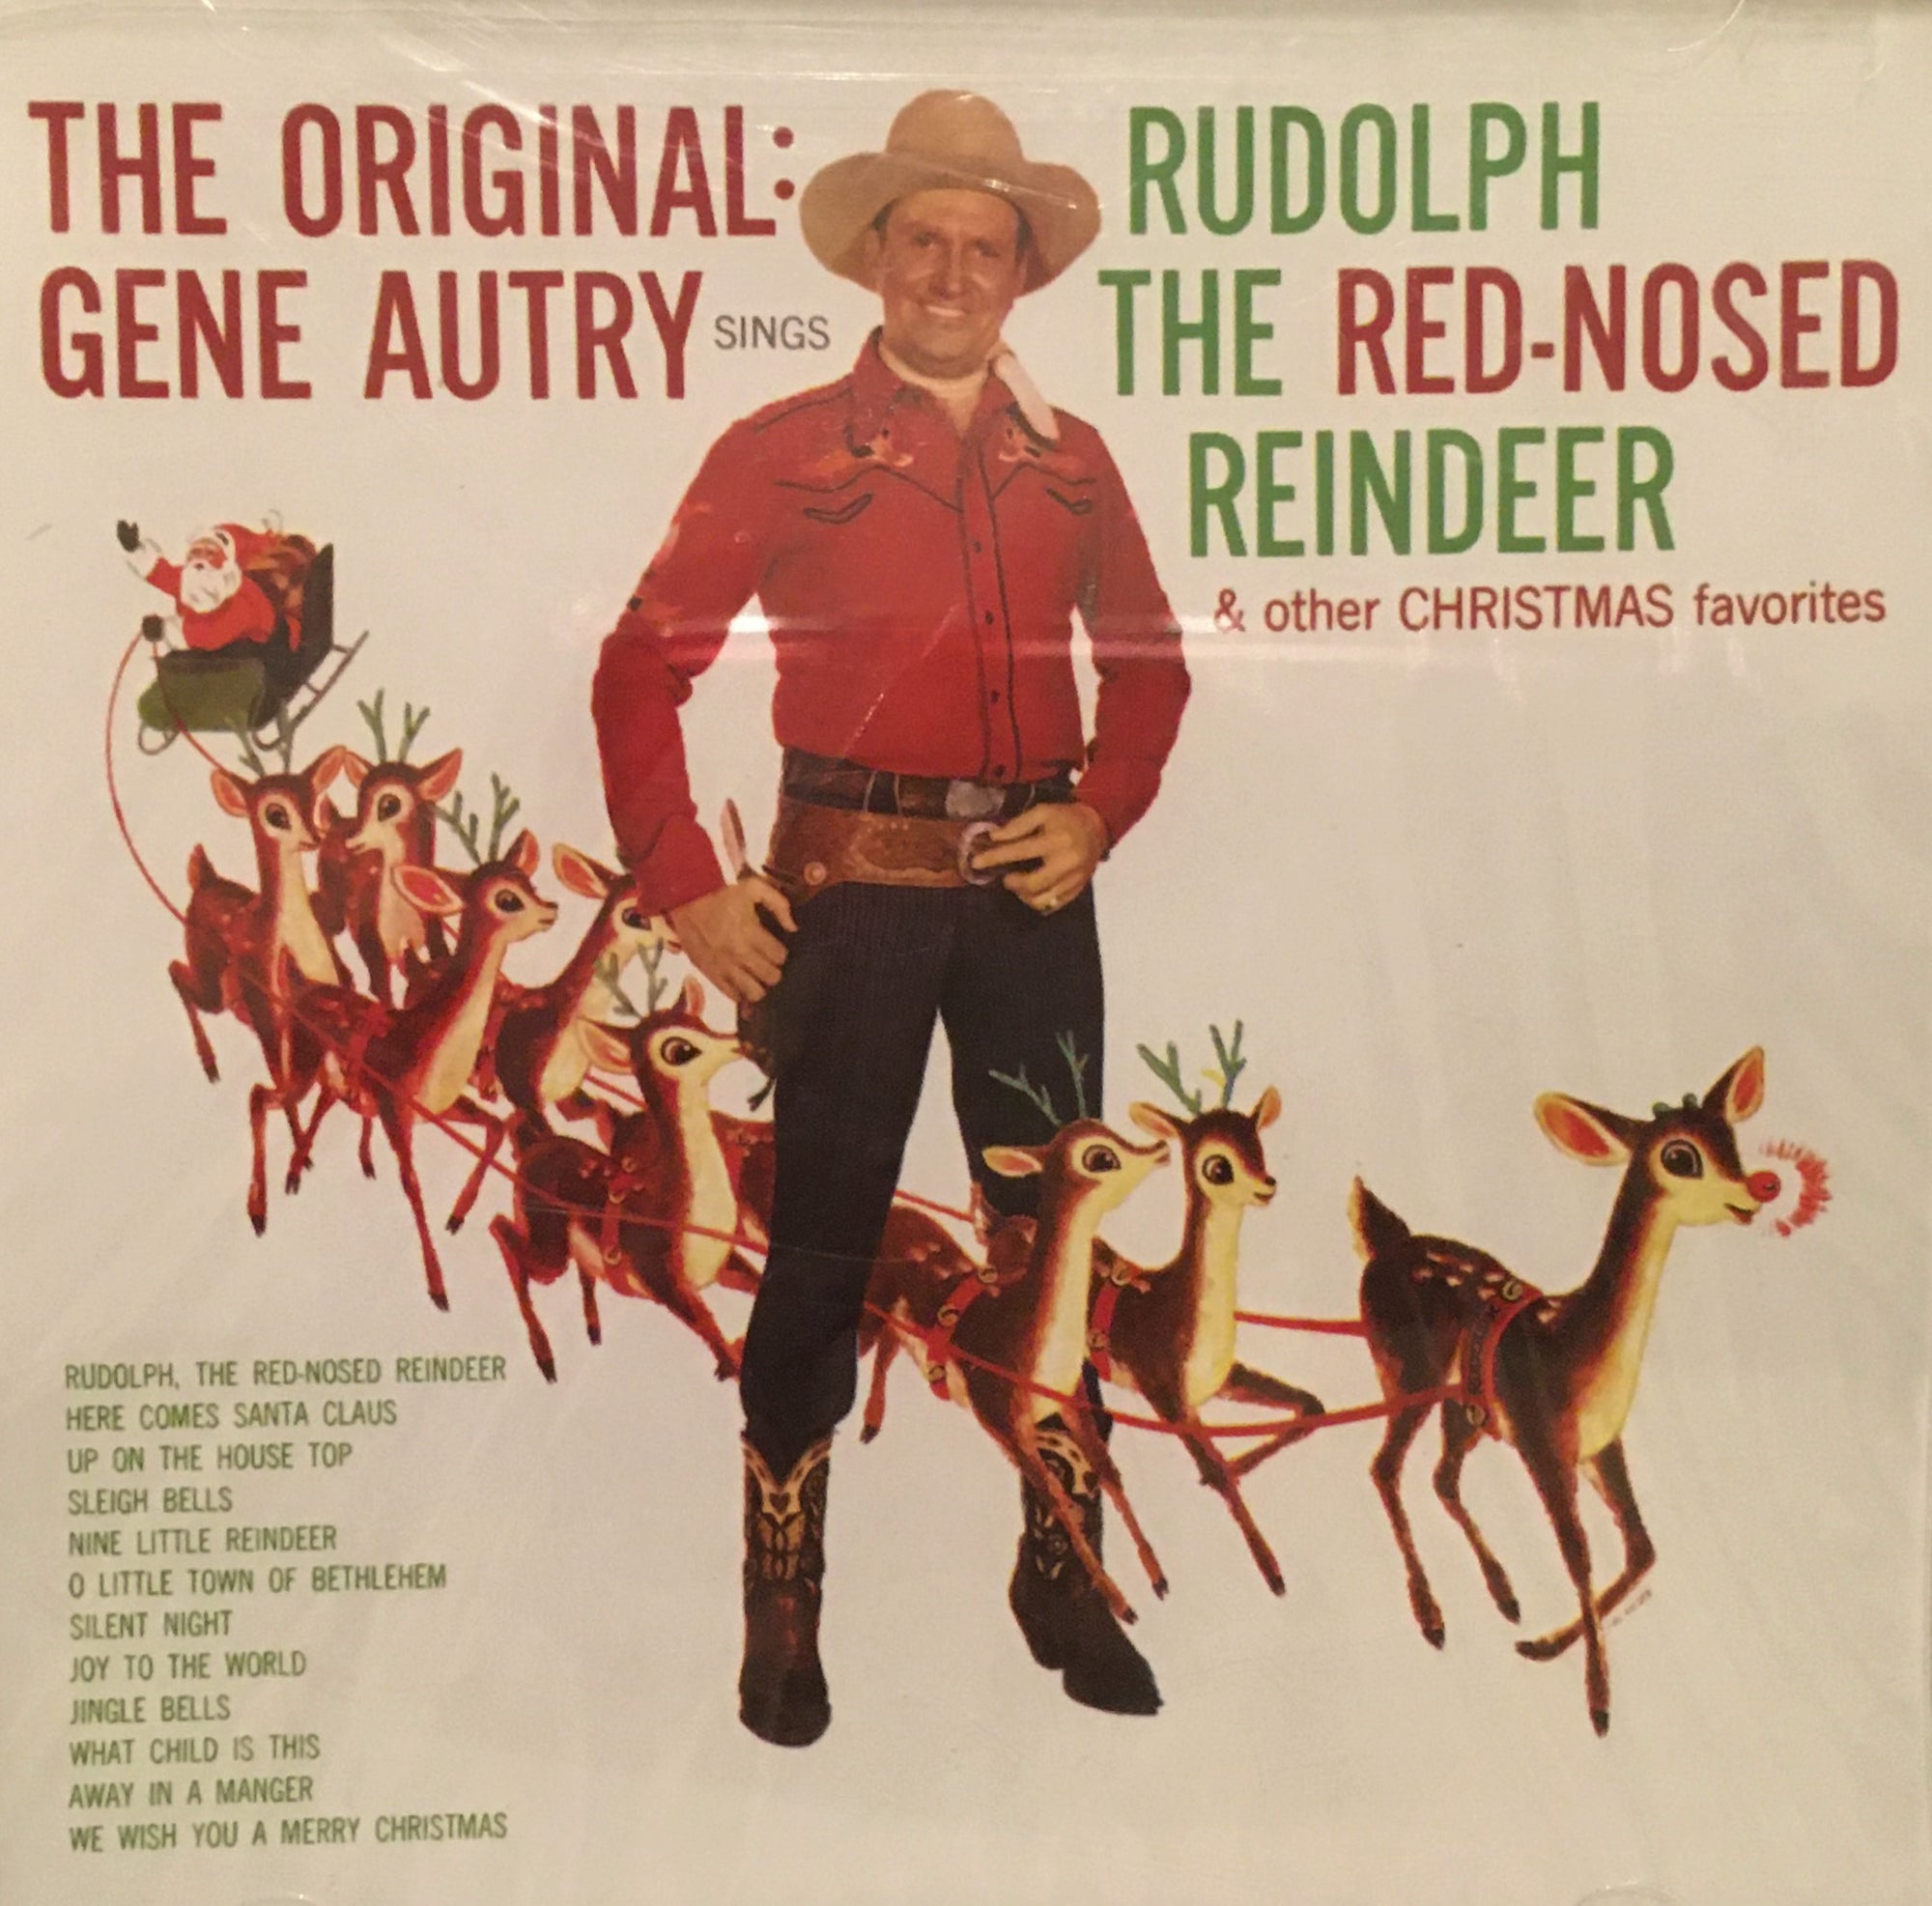 CD The Original: Gene Autry Sings Rudolph The Red-Nosed Reindeer 